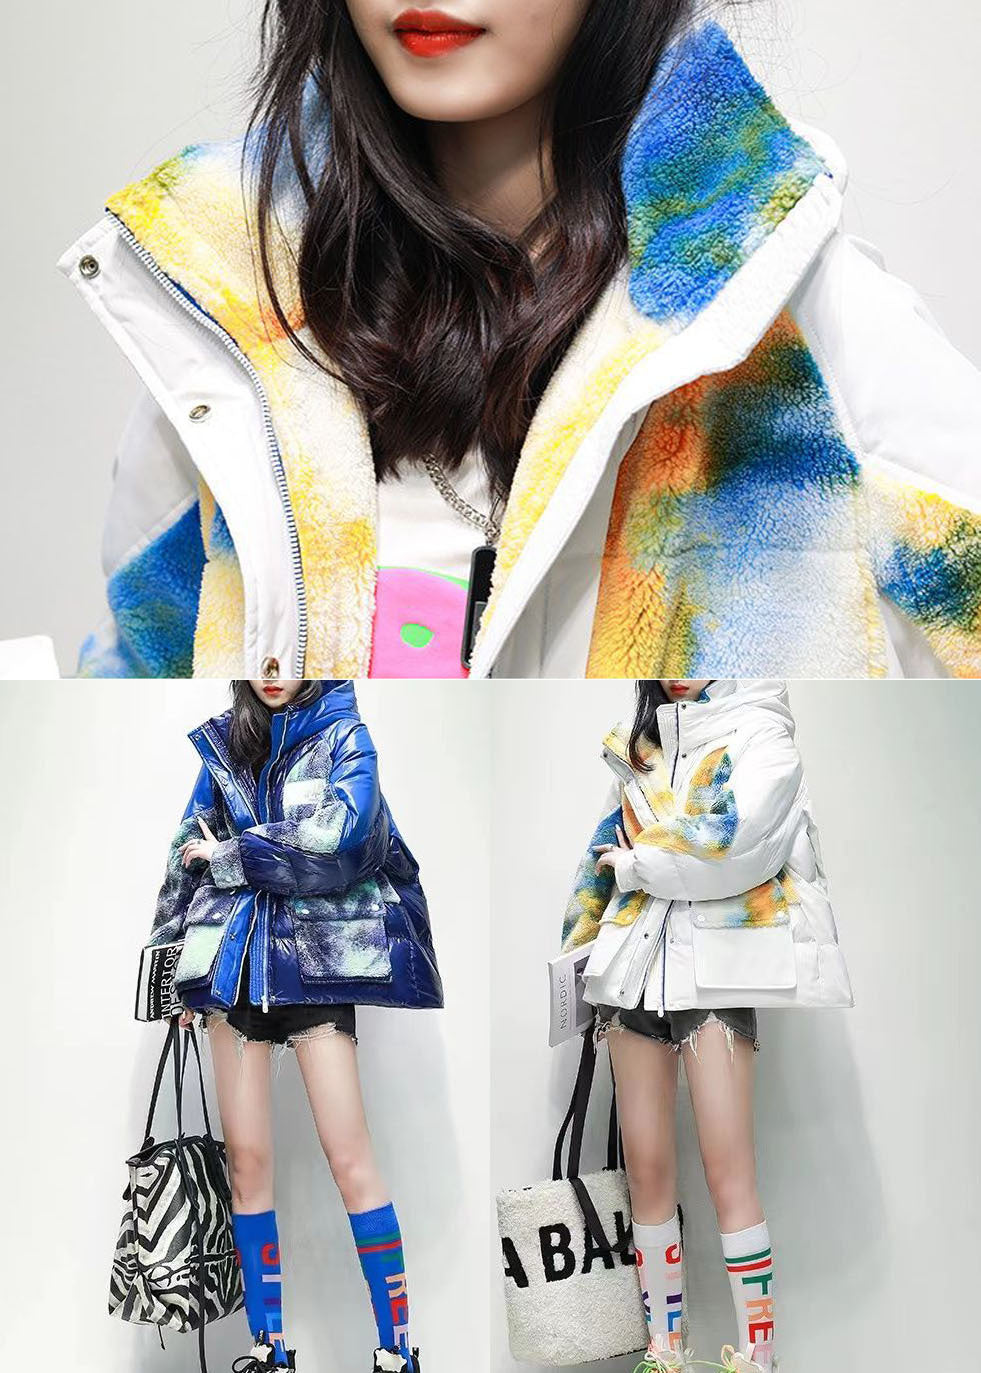 Casual Blue Hooded Patchwork Print Duck Down Puffer Jacket Winter